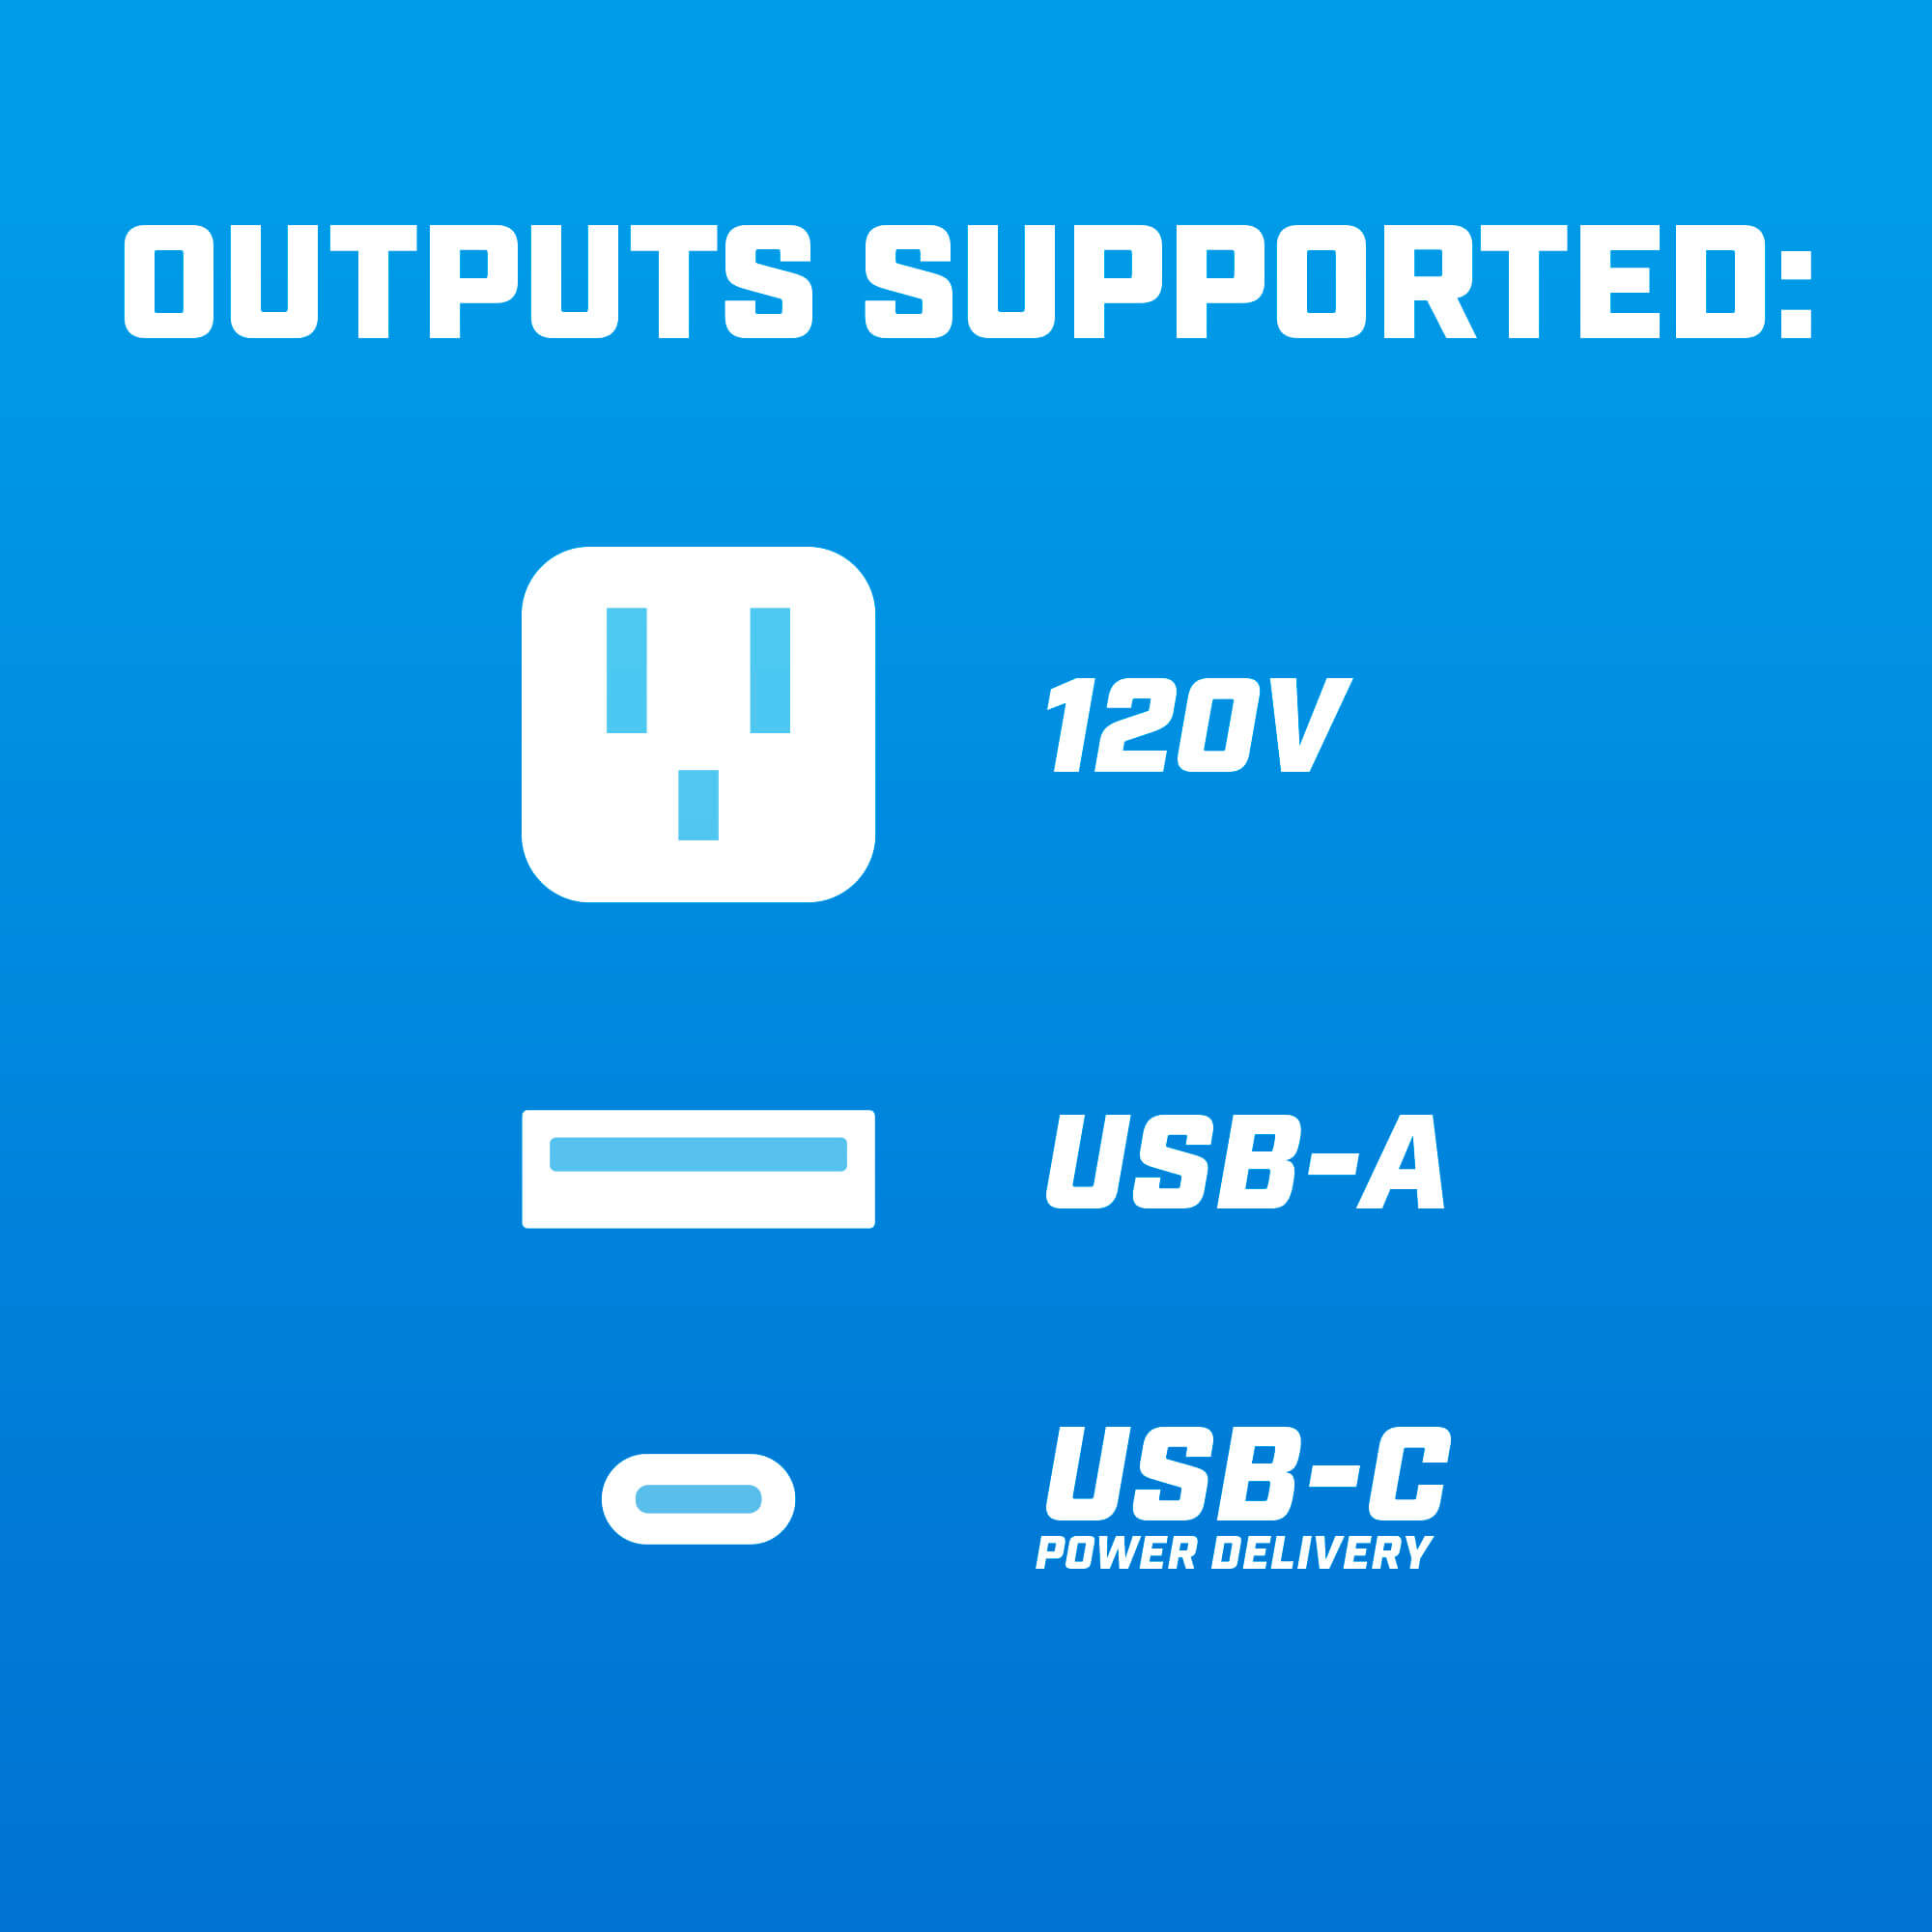 supports 120v, usb-a, usb-c outputs